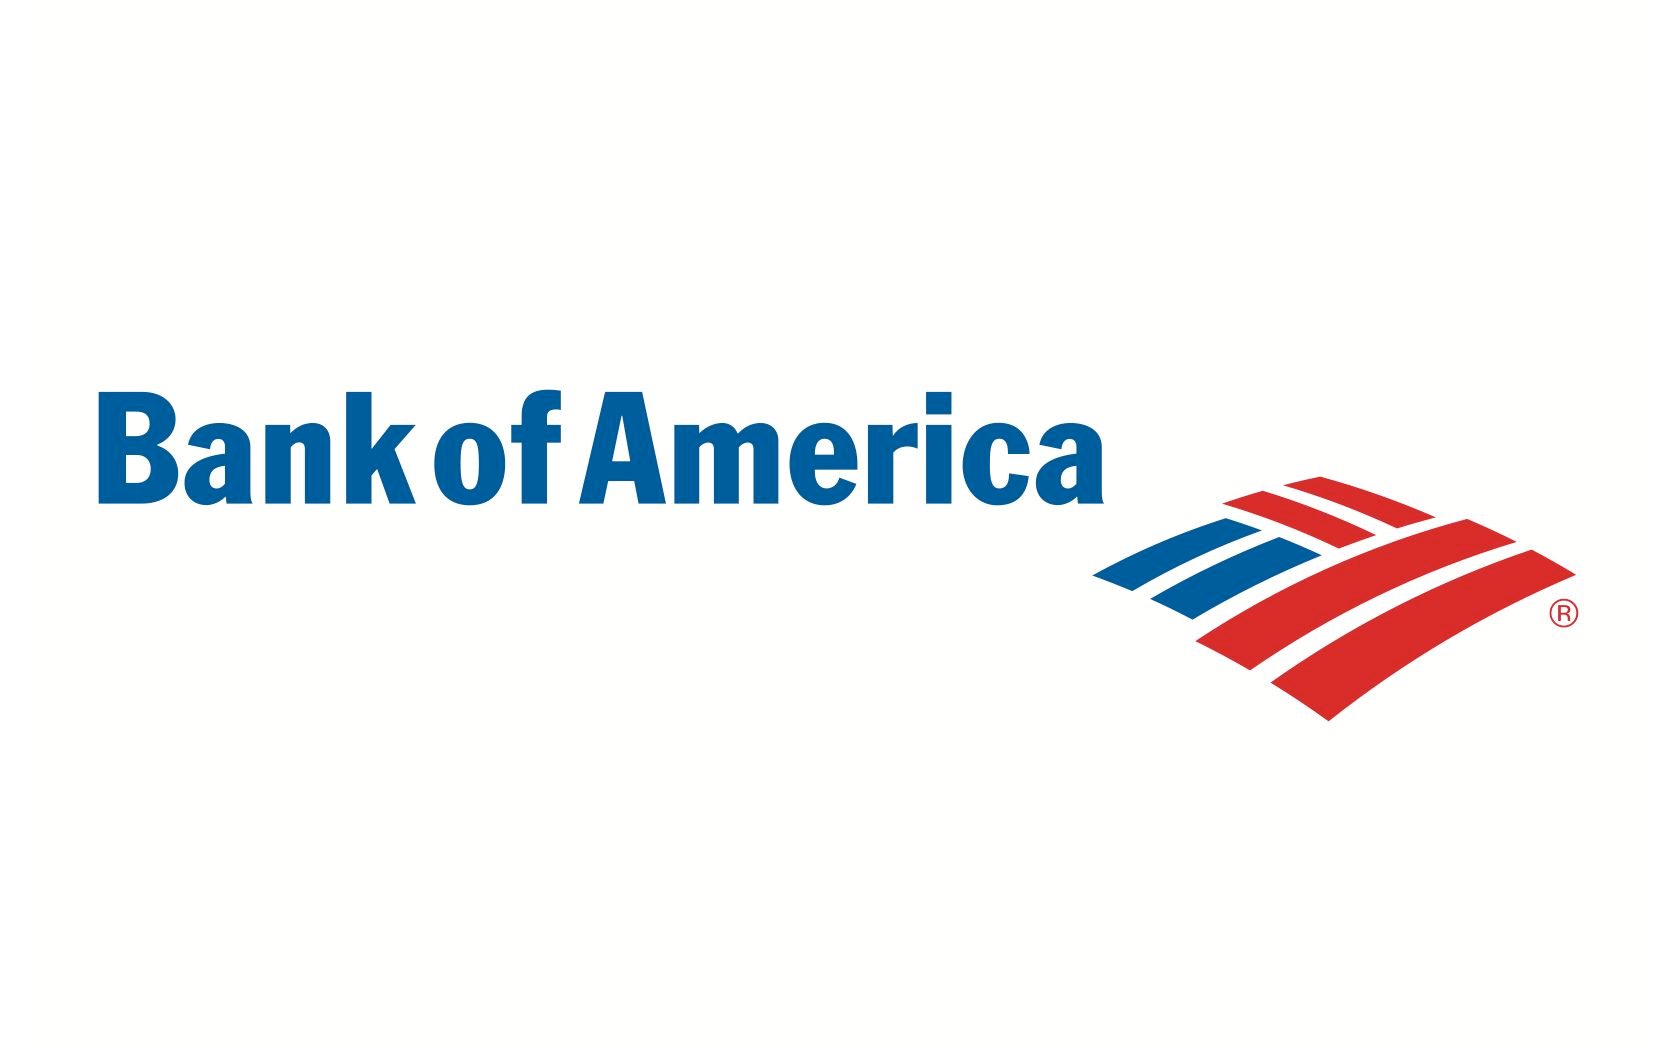 Bank of Americas Windows 10 app coming this summer